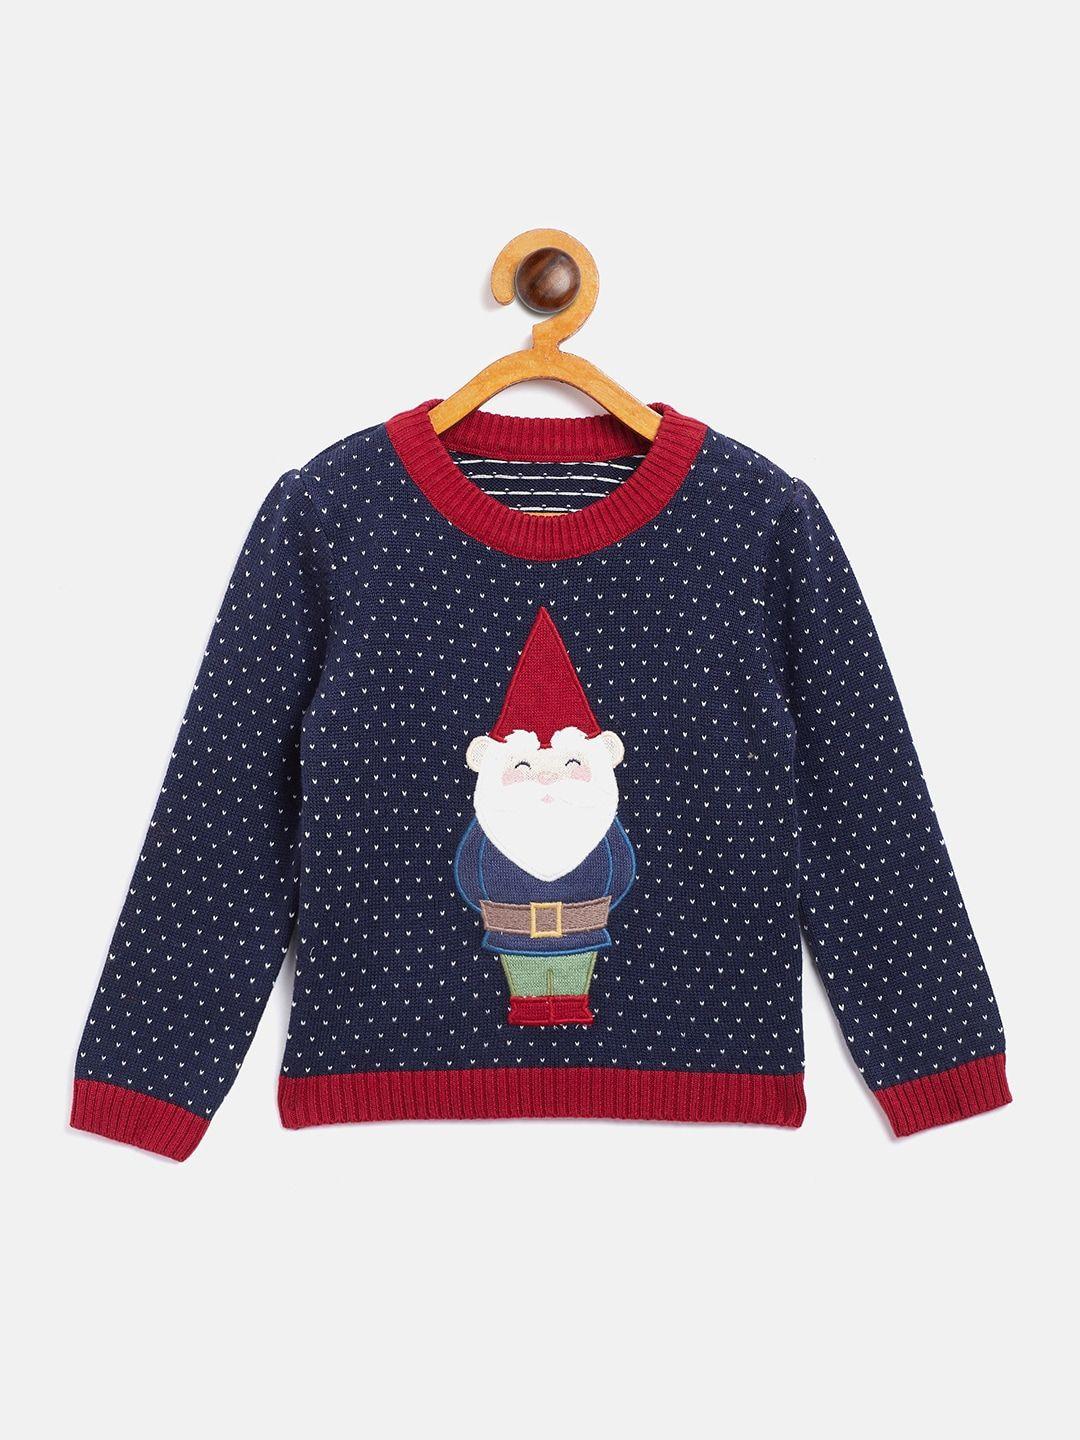 jwaaq boys navy blue & red embroidered pullover sweater